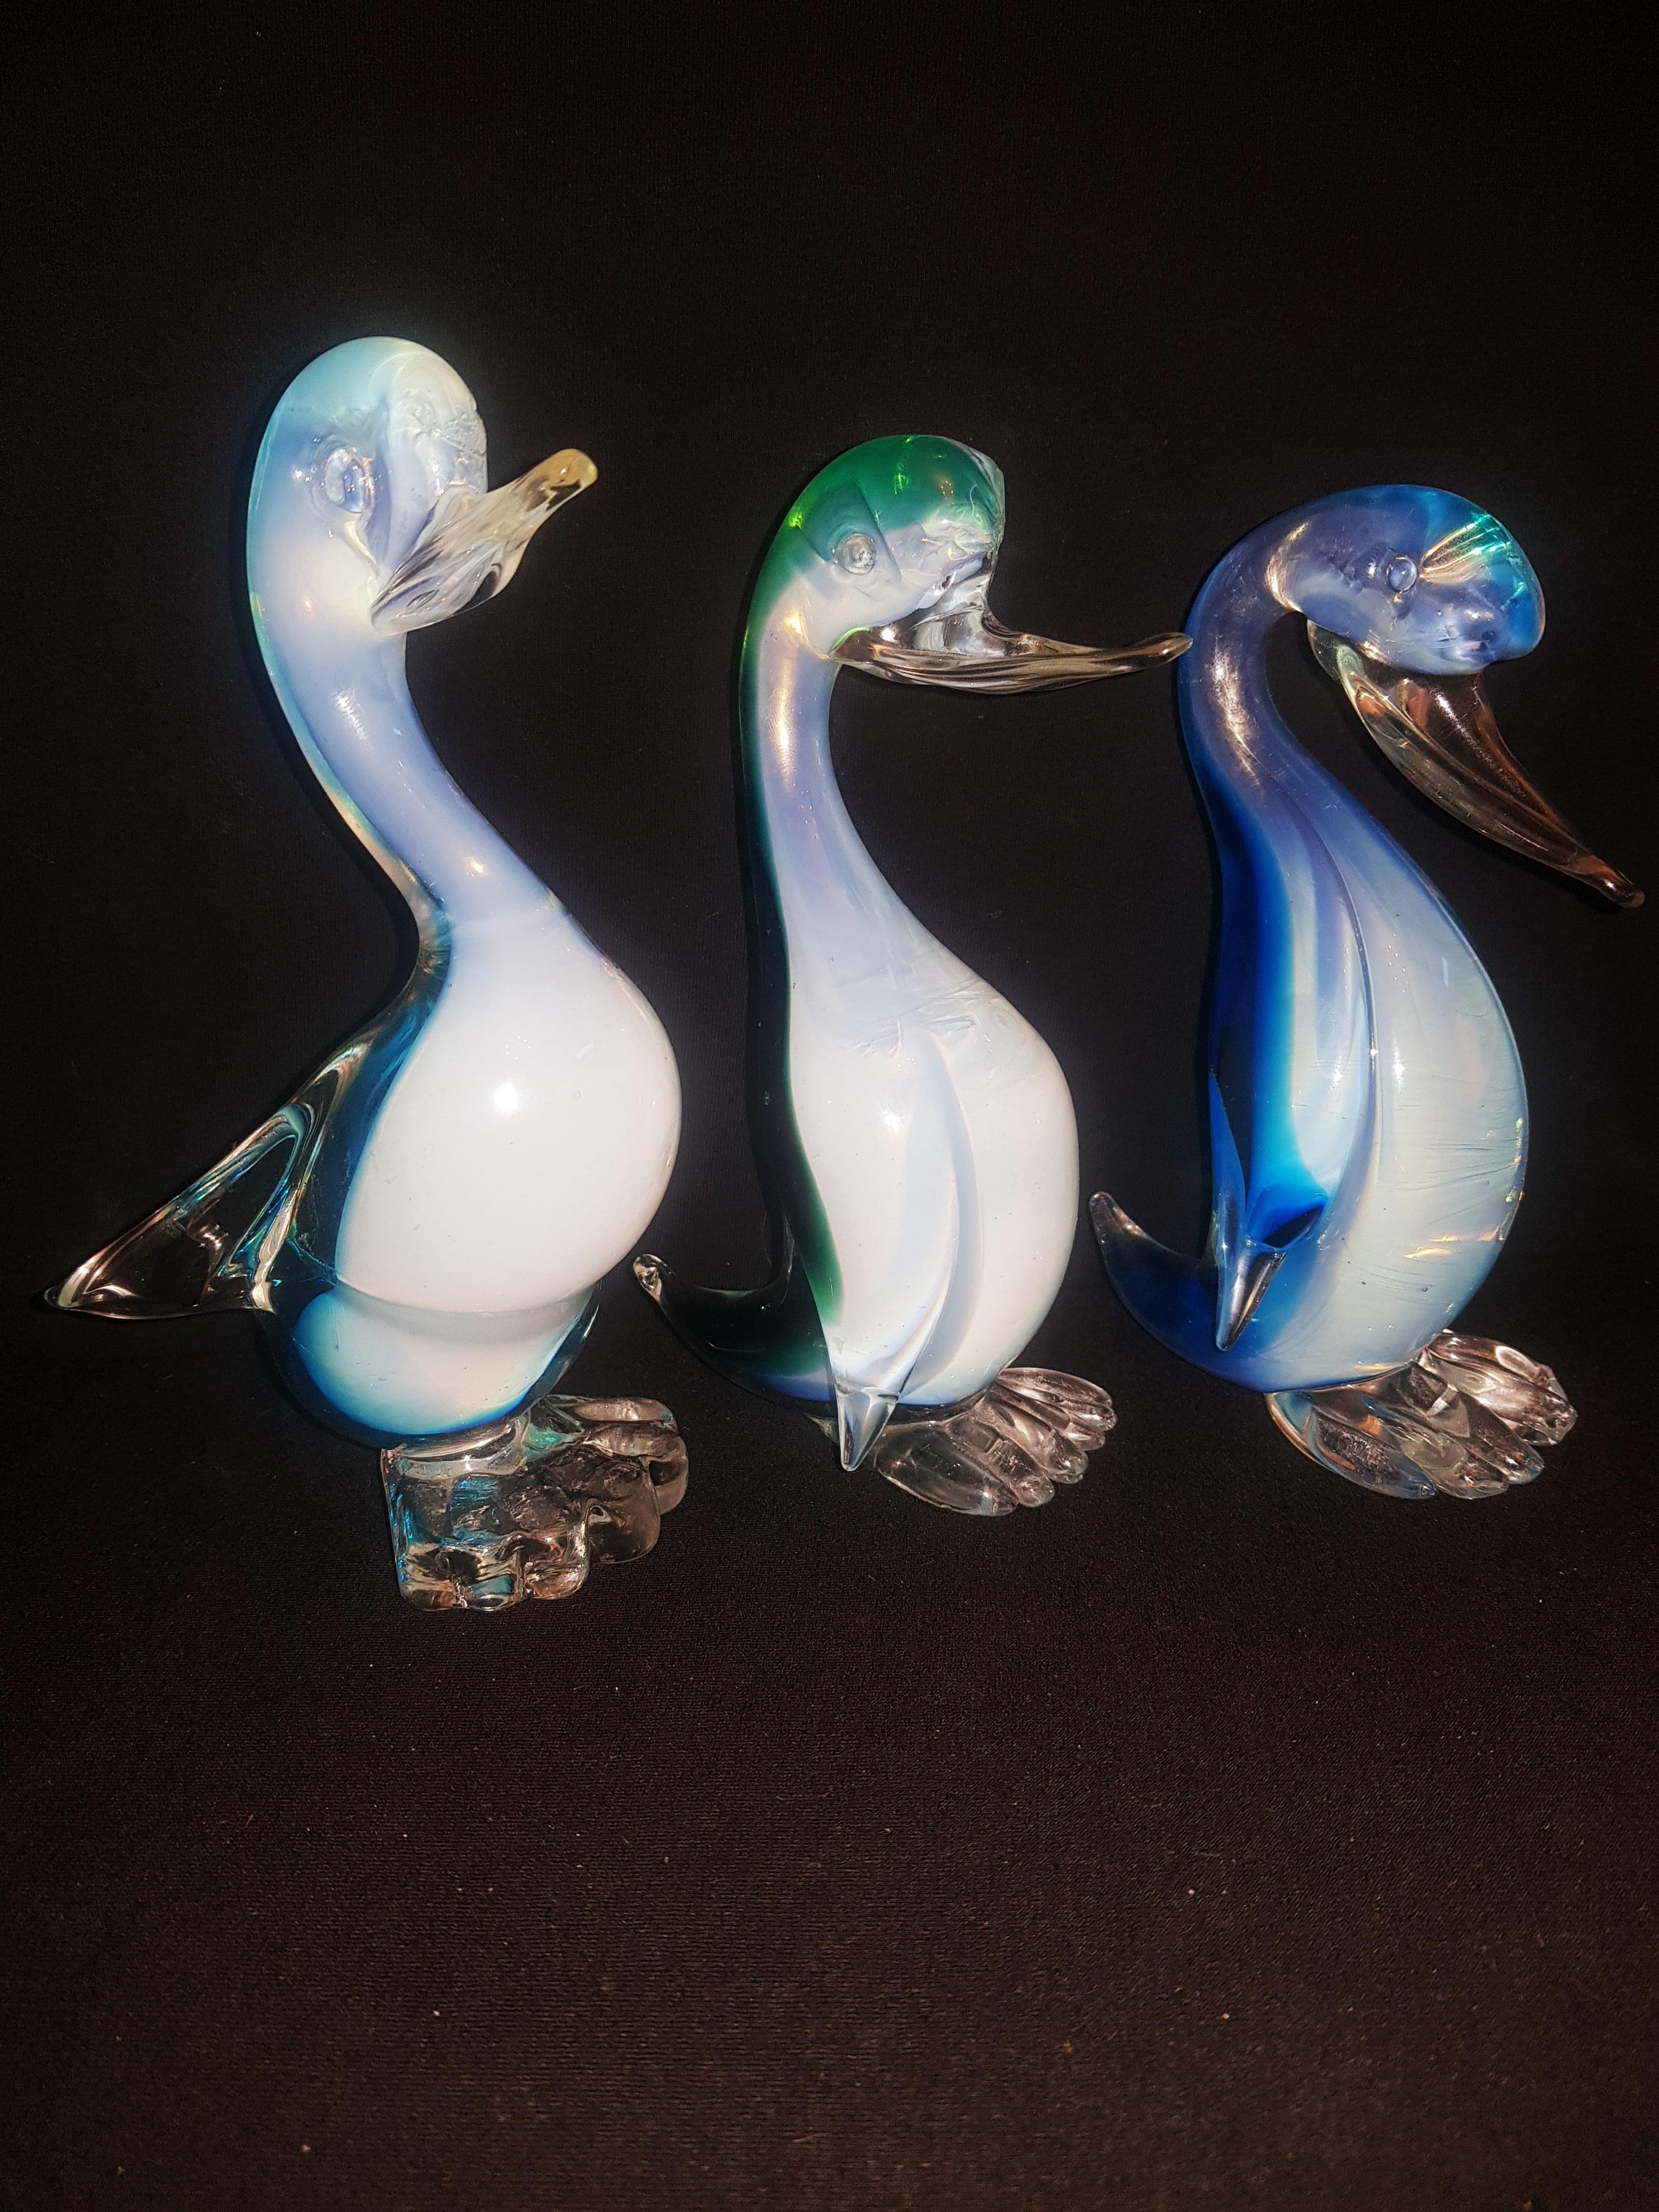 Set of three Murano glass sommerso opaline birds in blue, white and green, attributed to Fratelli Toso; years 1960-1969. The birds are 16cm, 17cm, and 18cm tall, respectively. In excellent condition. 